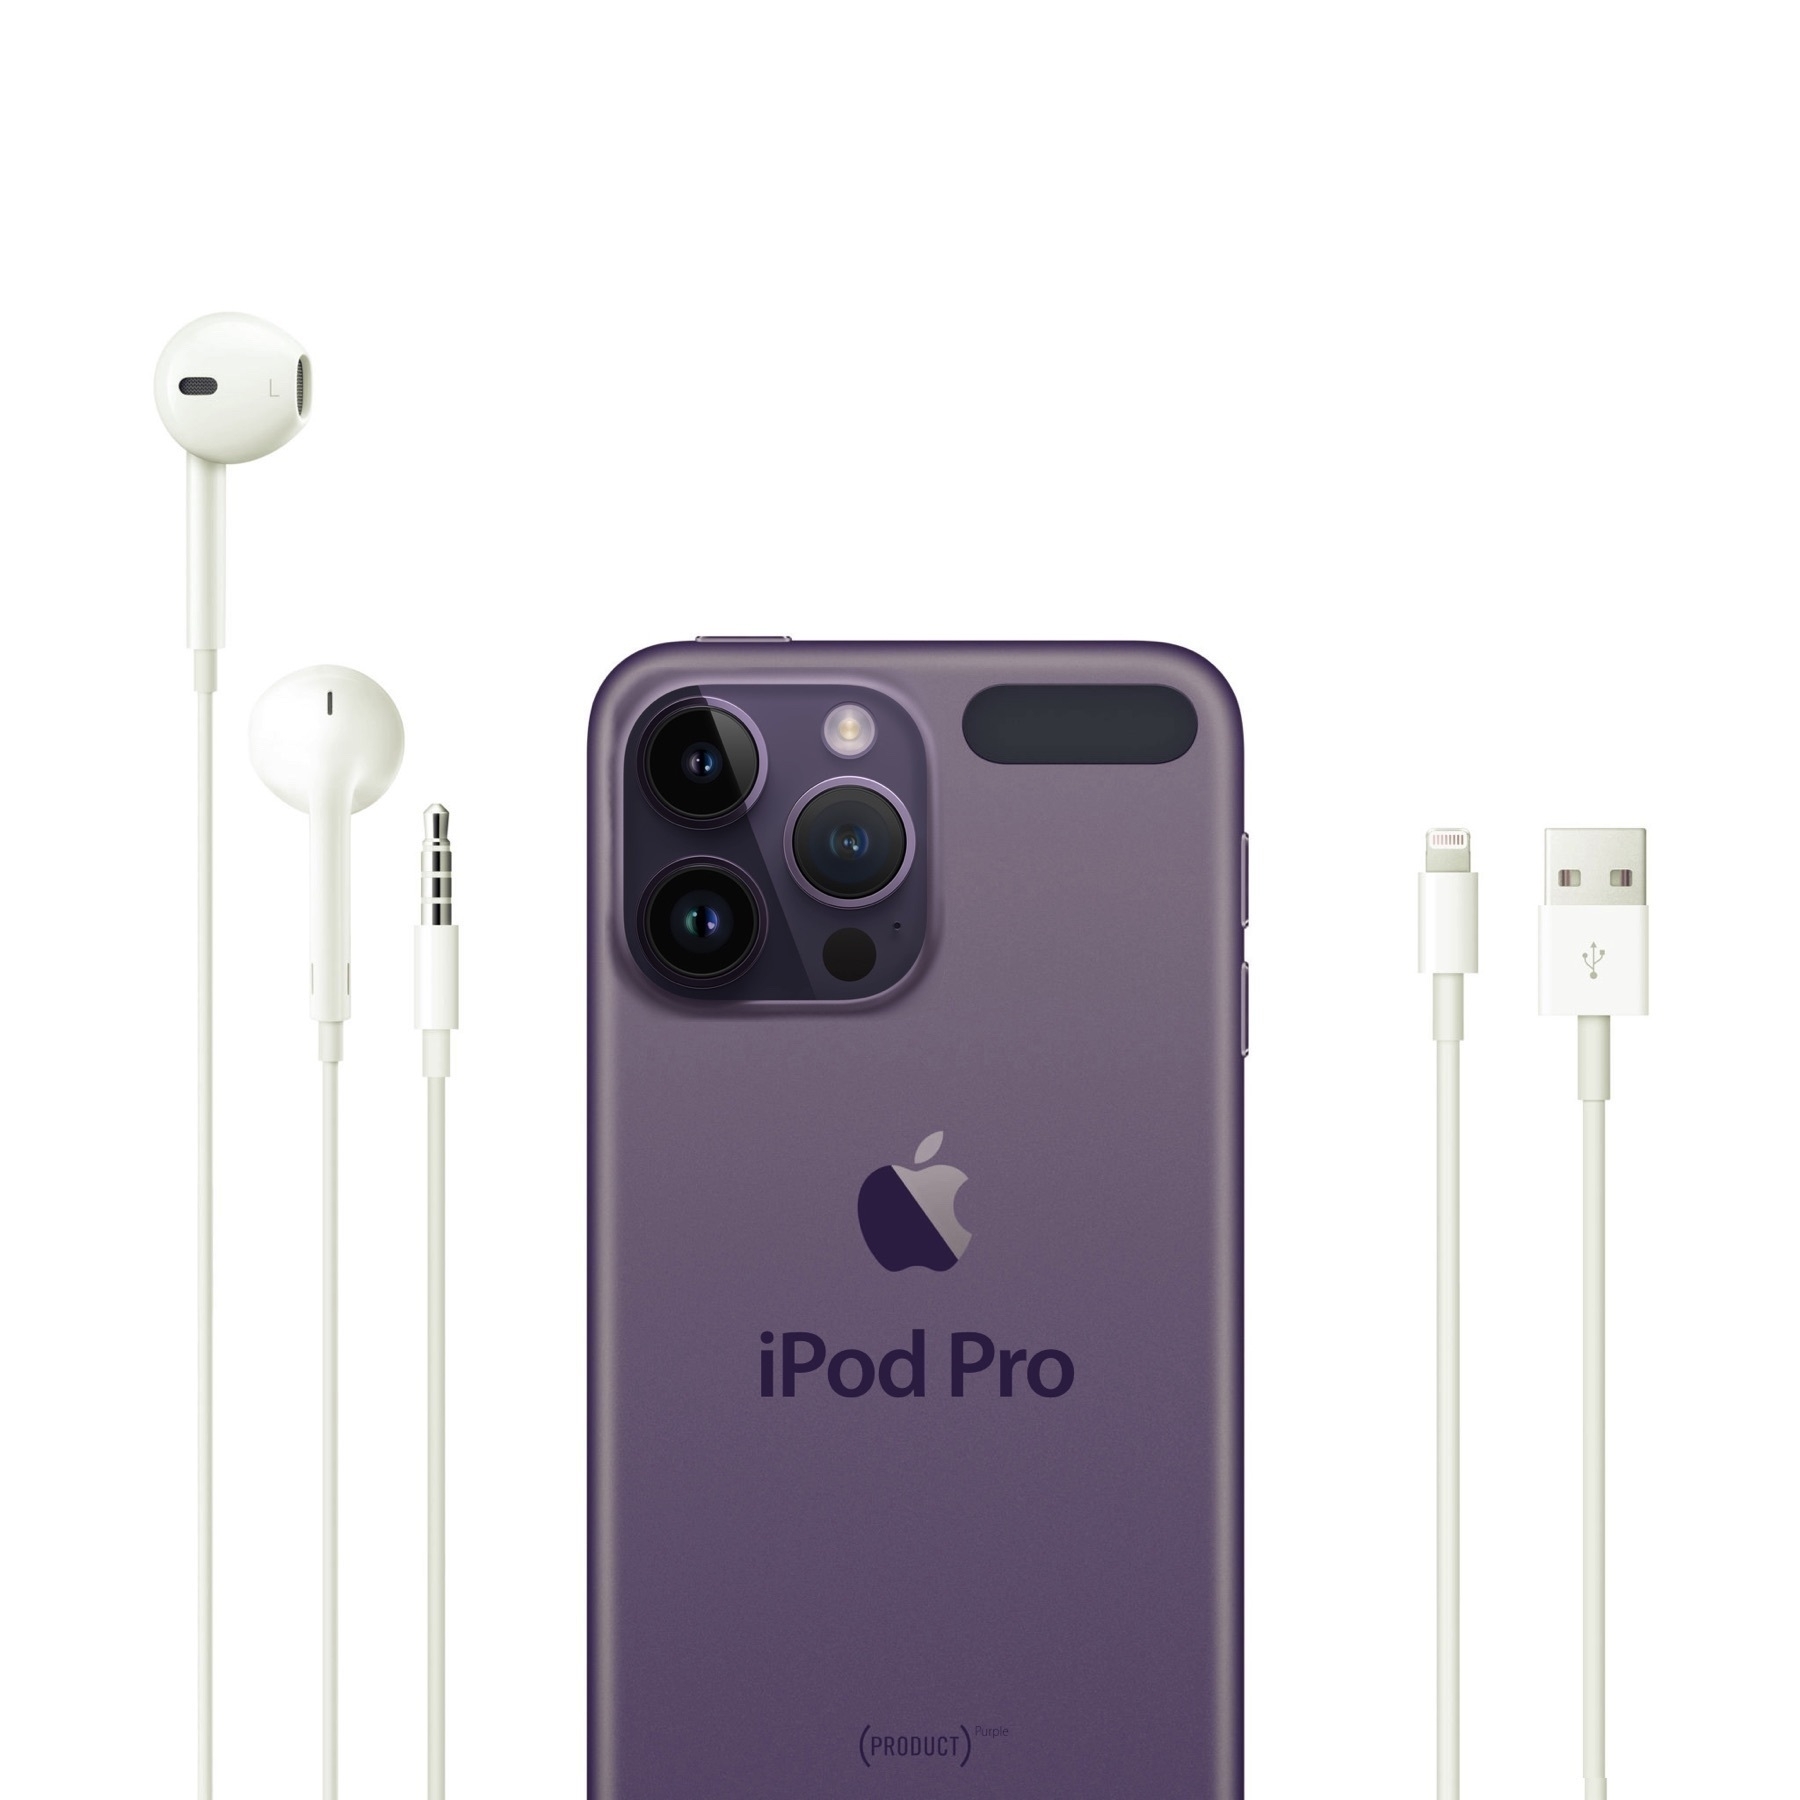 iPod Touch Pro in purple